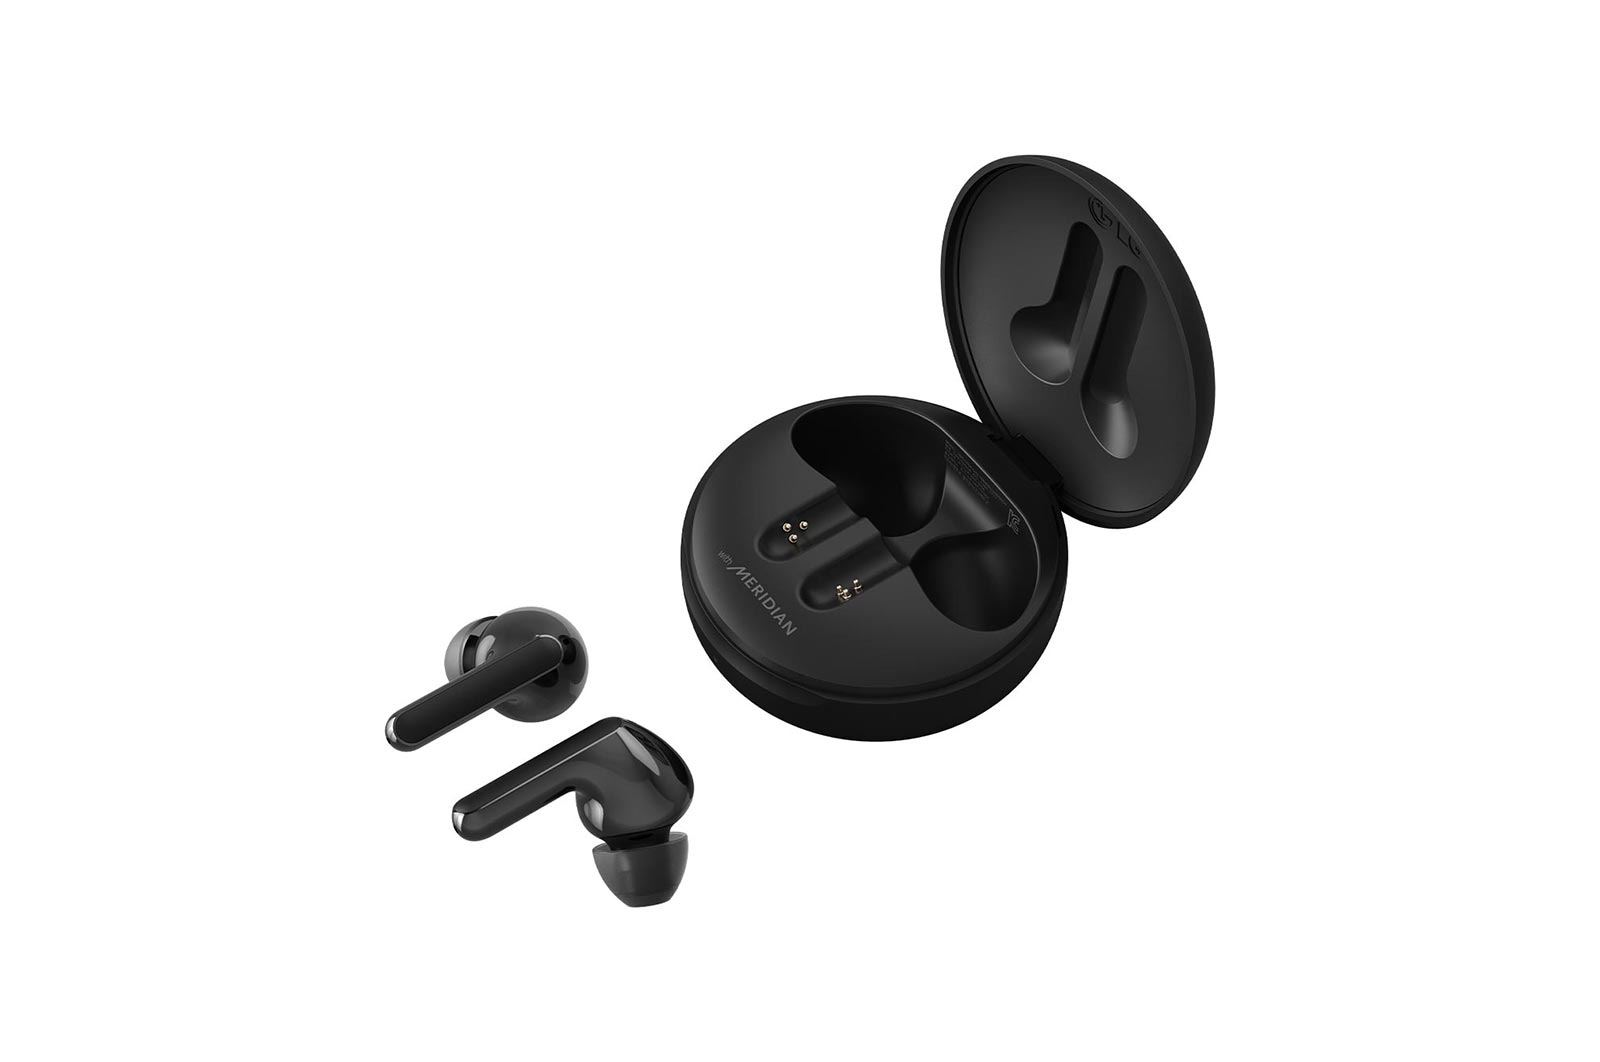 LG Wireless Earbuds Water Resistant and Sound Isolating - Black